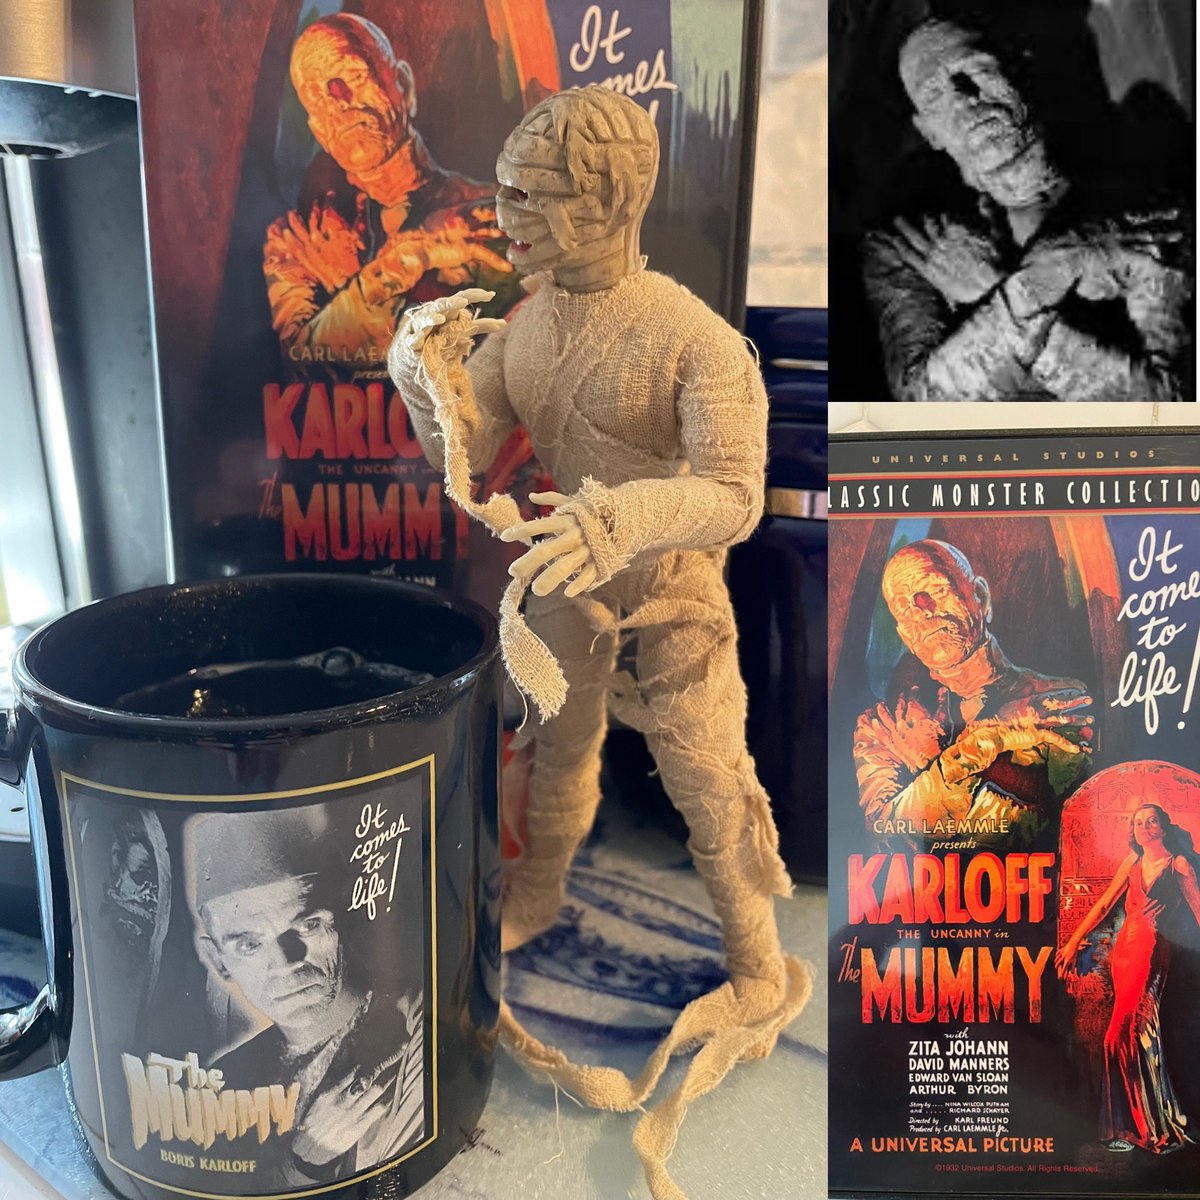 COFFEE with SCREAM- Saturday morning classic horror films, just like in the days of my youth! This week’s film- THE MUMMY (1932). Boris Karloff “kills it” in this role! Many sequels and spinoffs would follow, but none as great as this film!